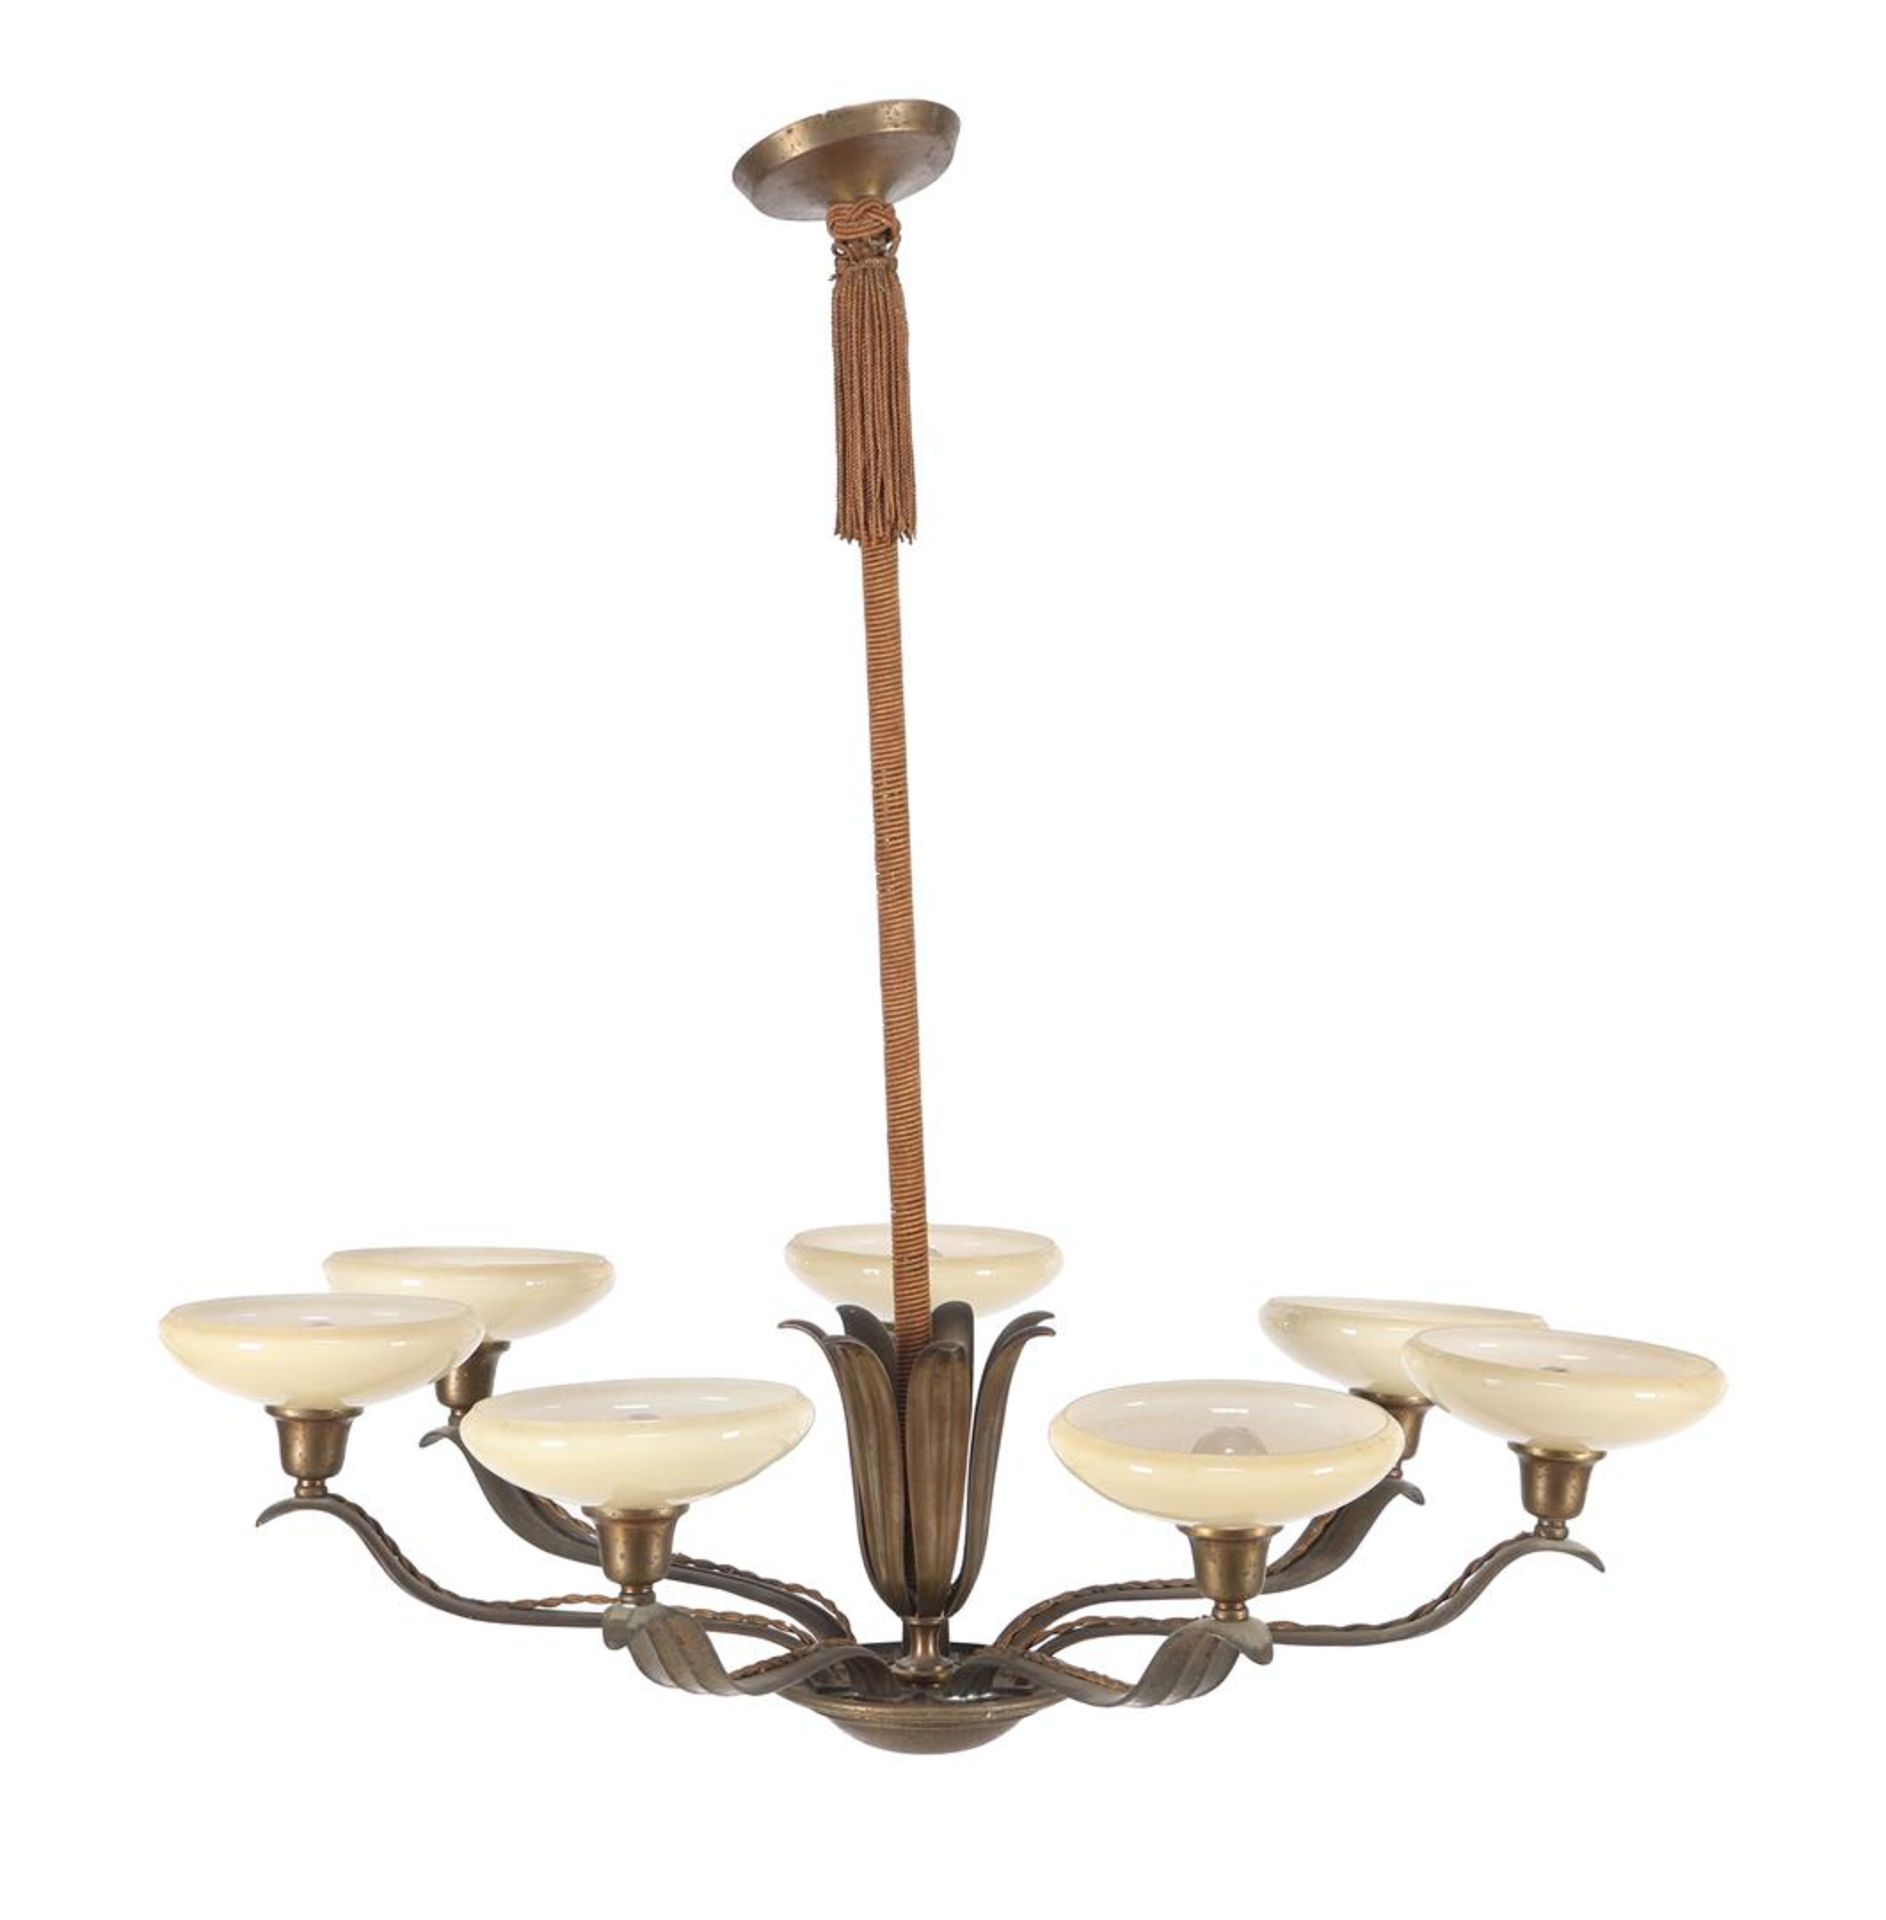 Bronze Art Deco 7-light hanging lamp with glass bowls